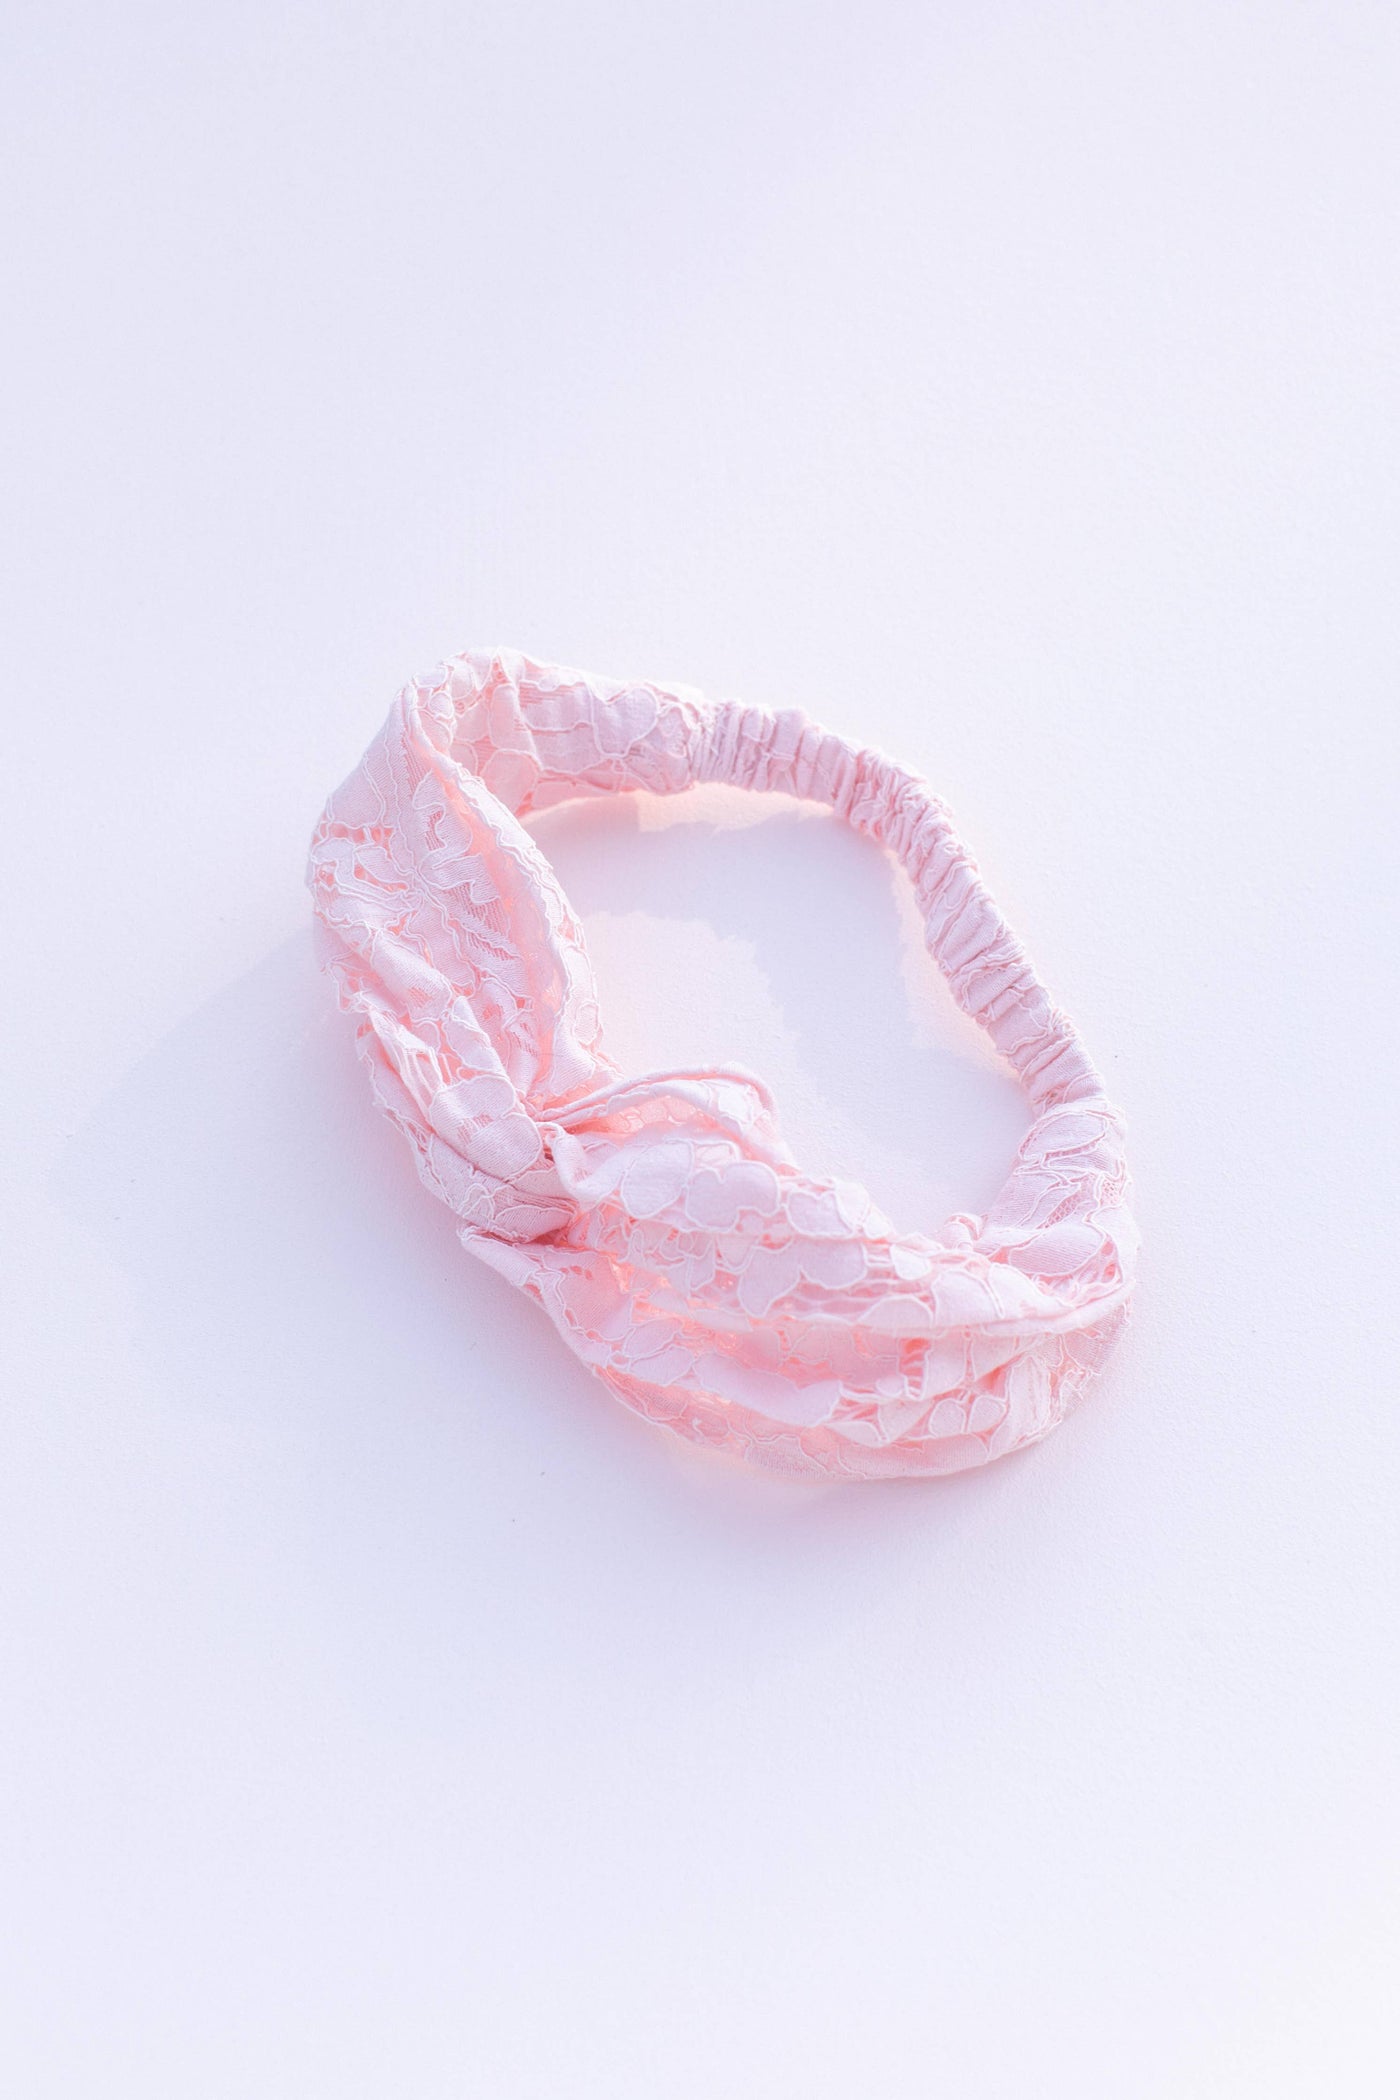 Space 46 Wholesale - Valentine's Pink Lace Headband